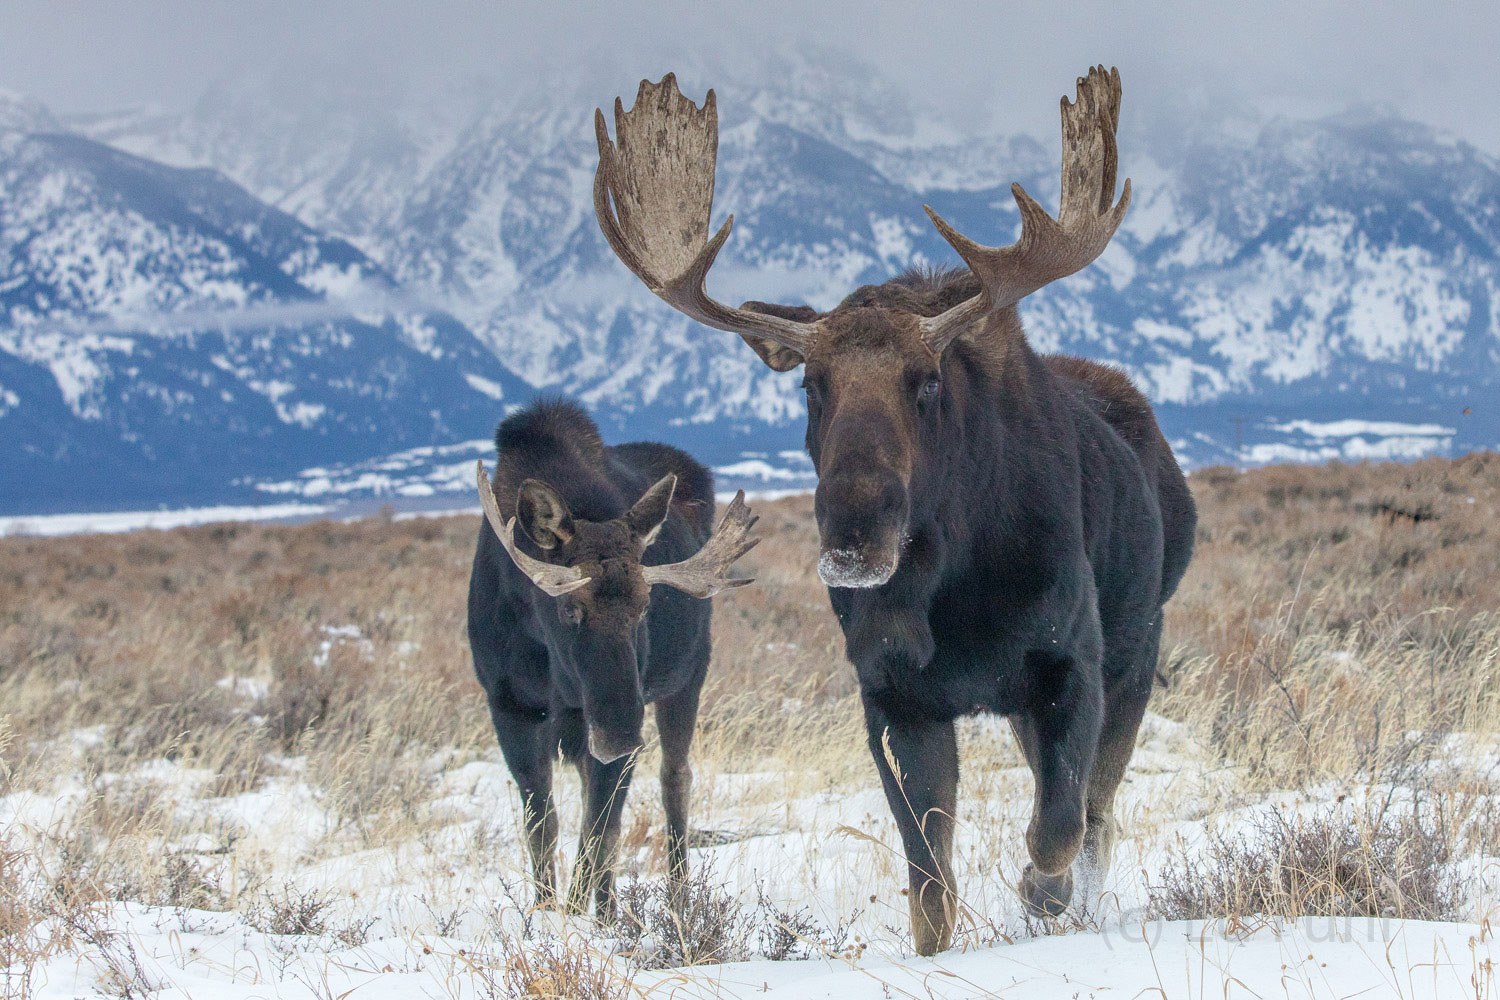 A large bull moose pays little attention to the younger bull who stays respectfully behind.  The younger moose may appear like...